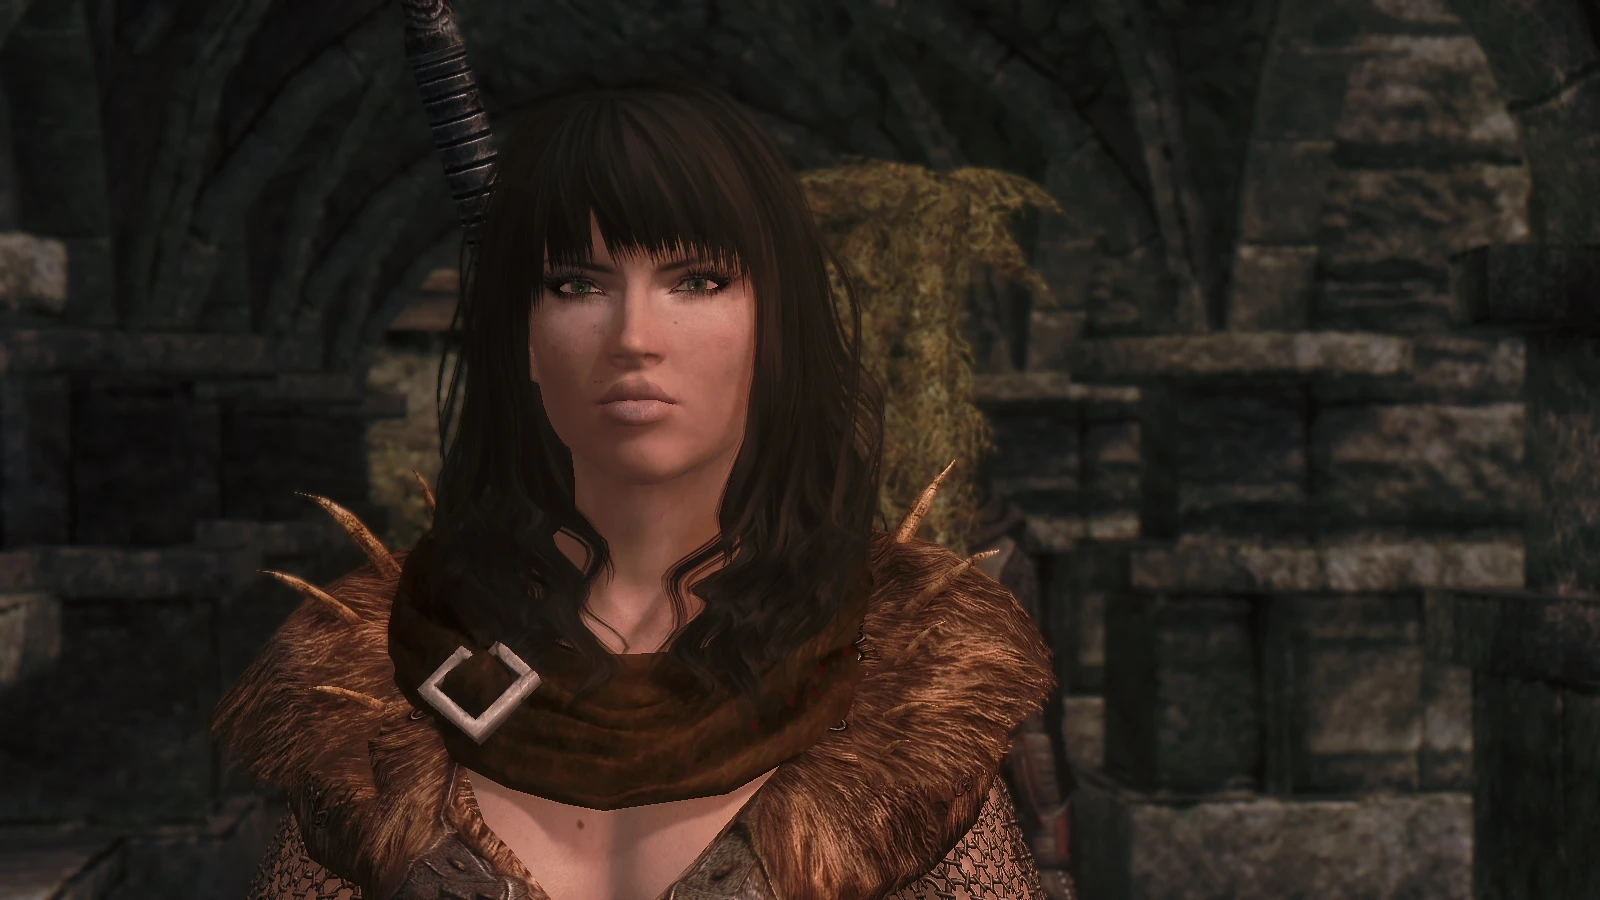 Lydia with mature mod for unp at Skyrim Nexus - Mods and ...